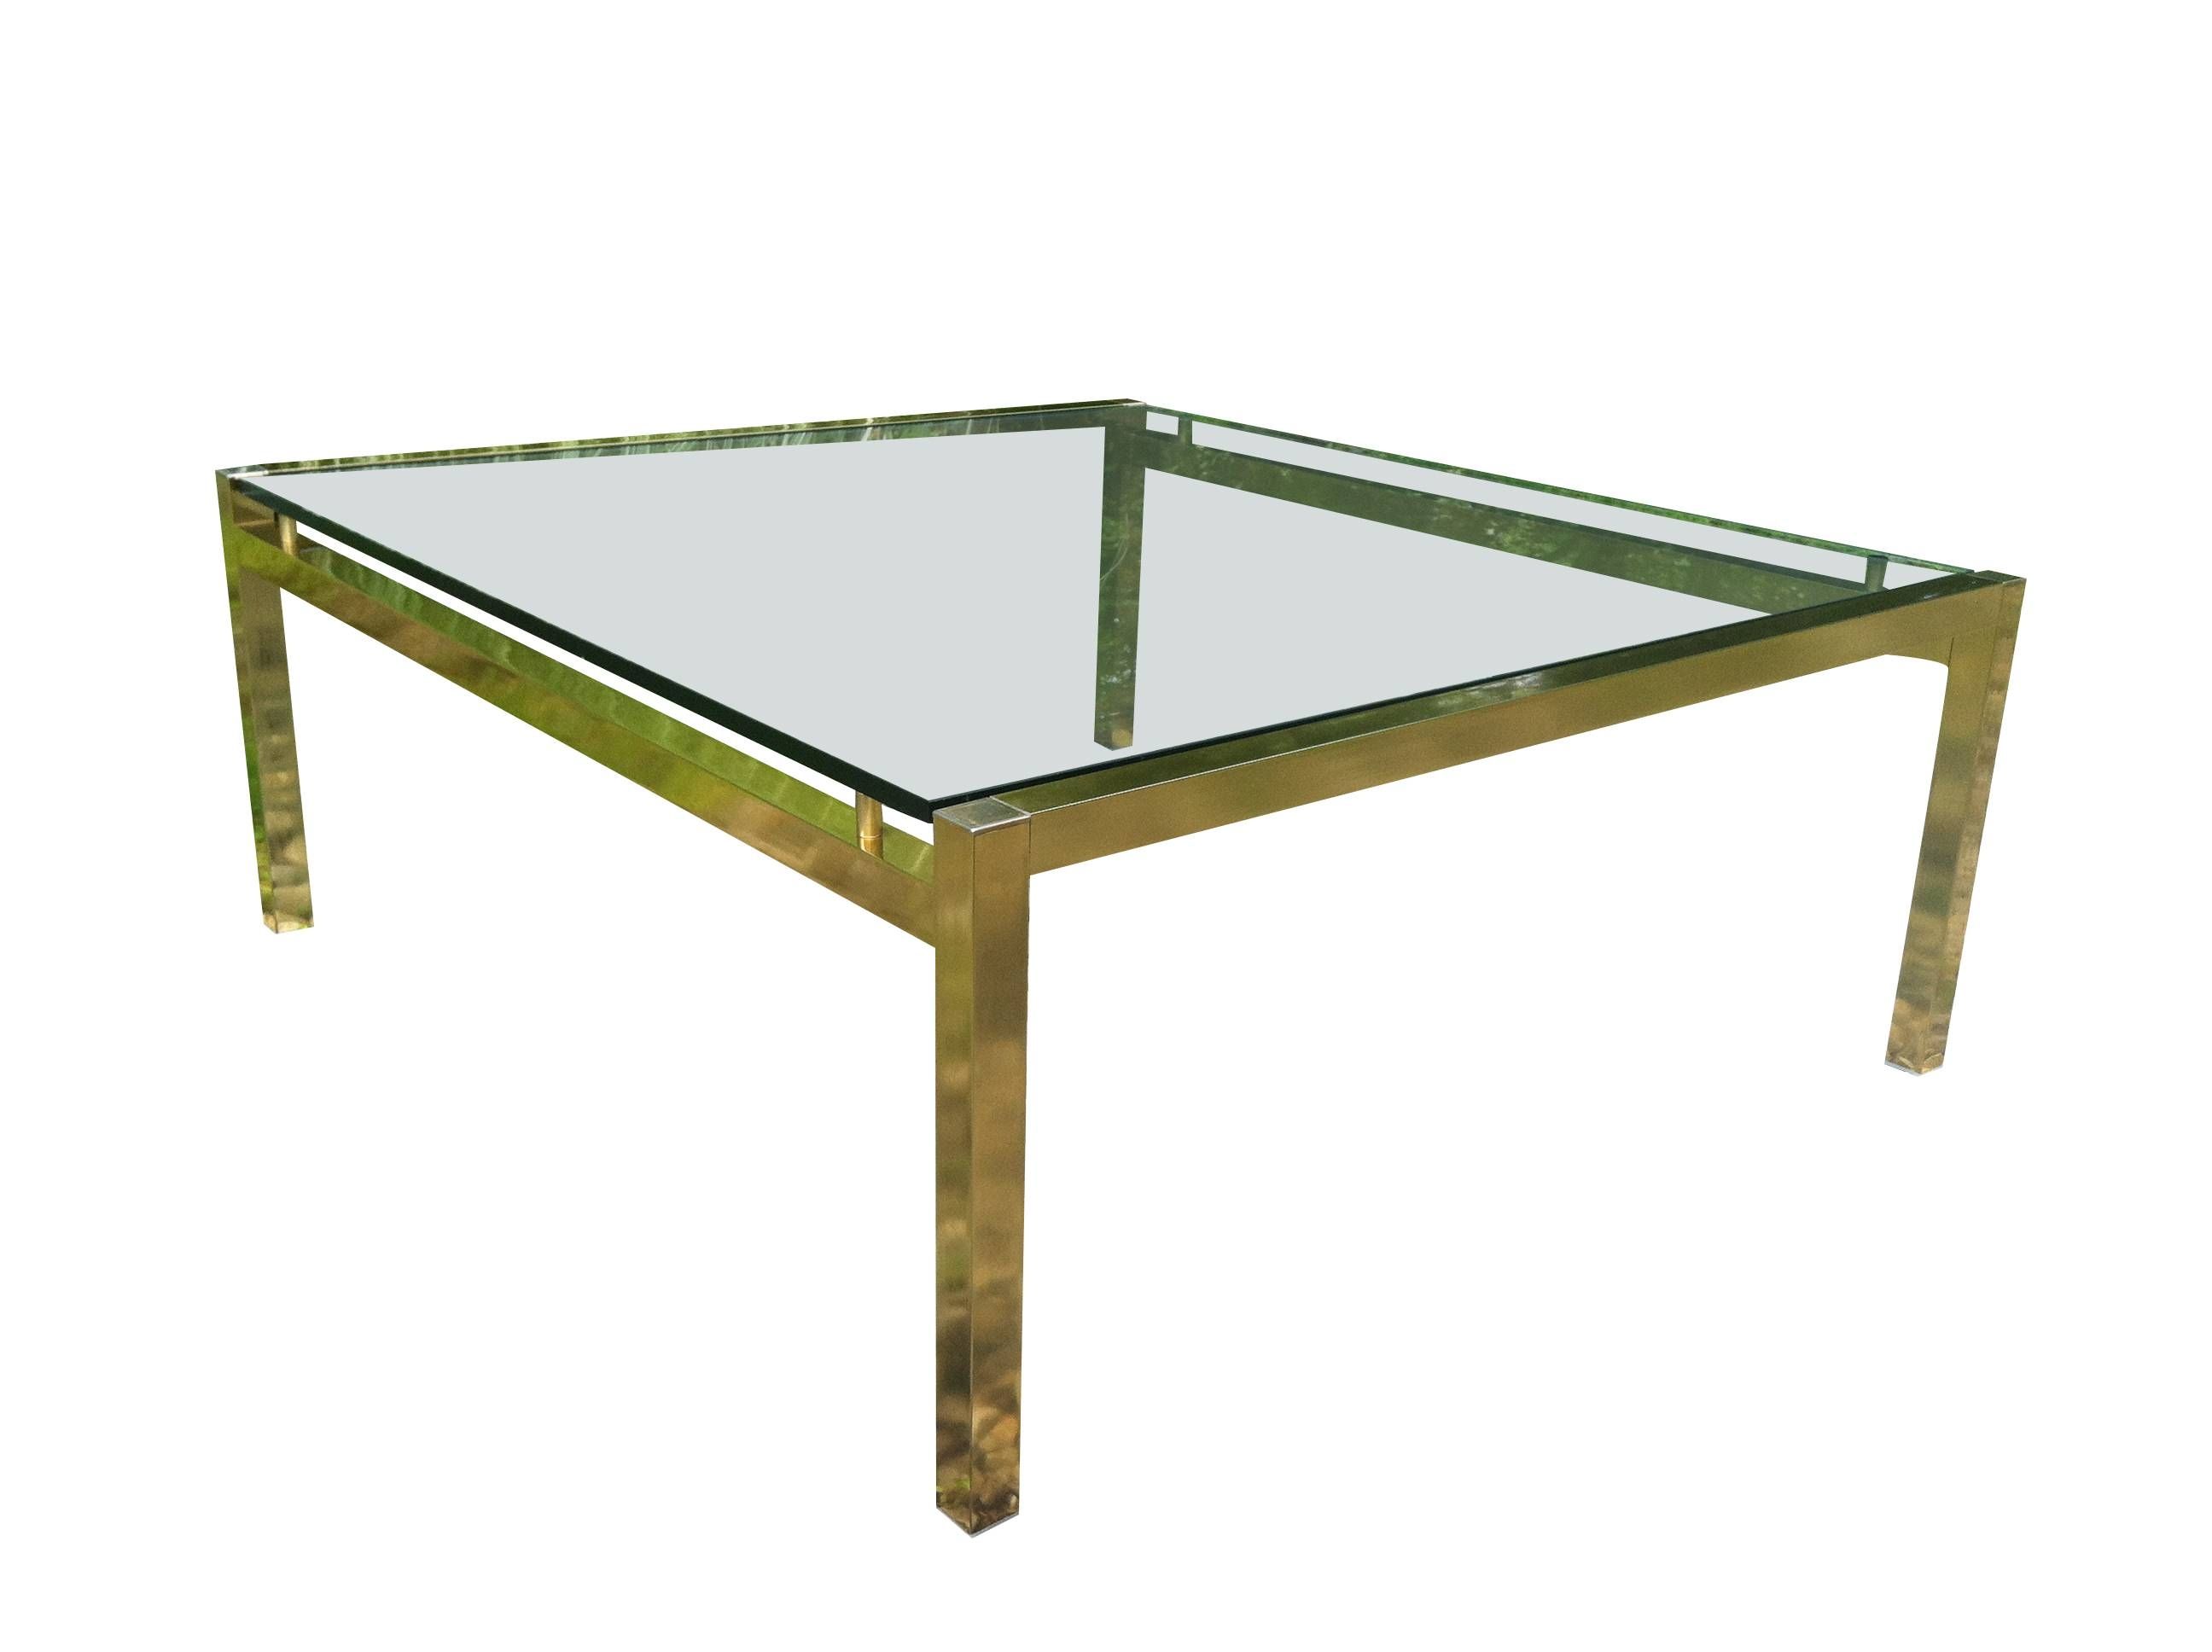 70s Brass Coffee Table With Floating Glass | Omero Home With Floating Glass Coffee Tables (View 6 of 30)